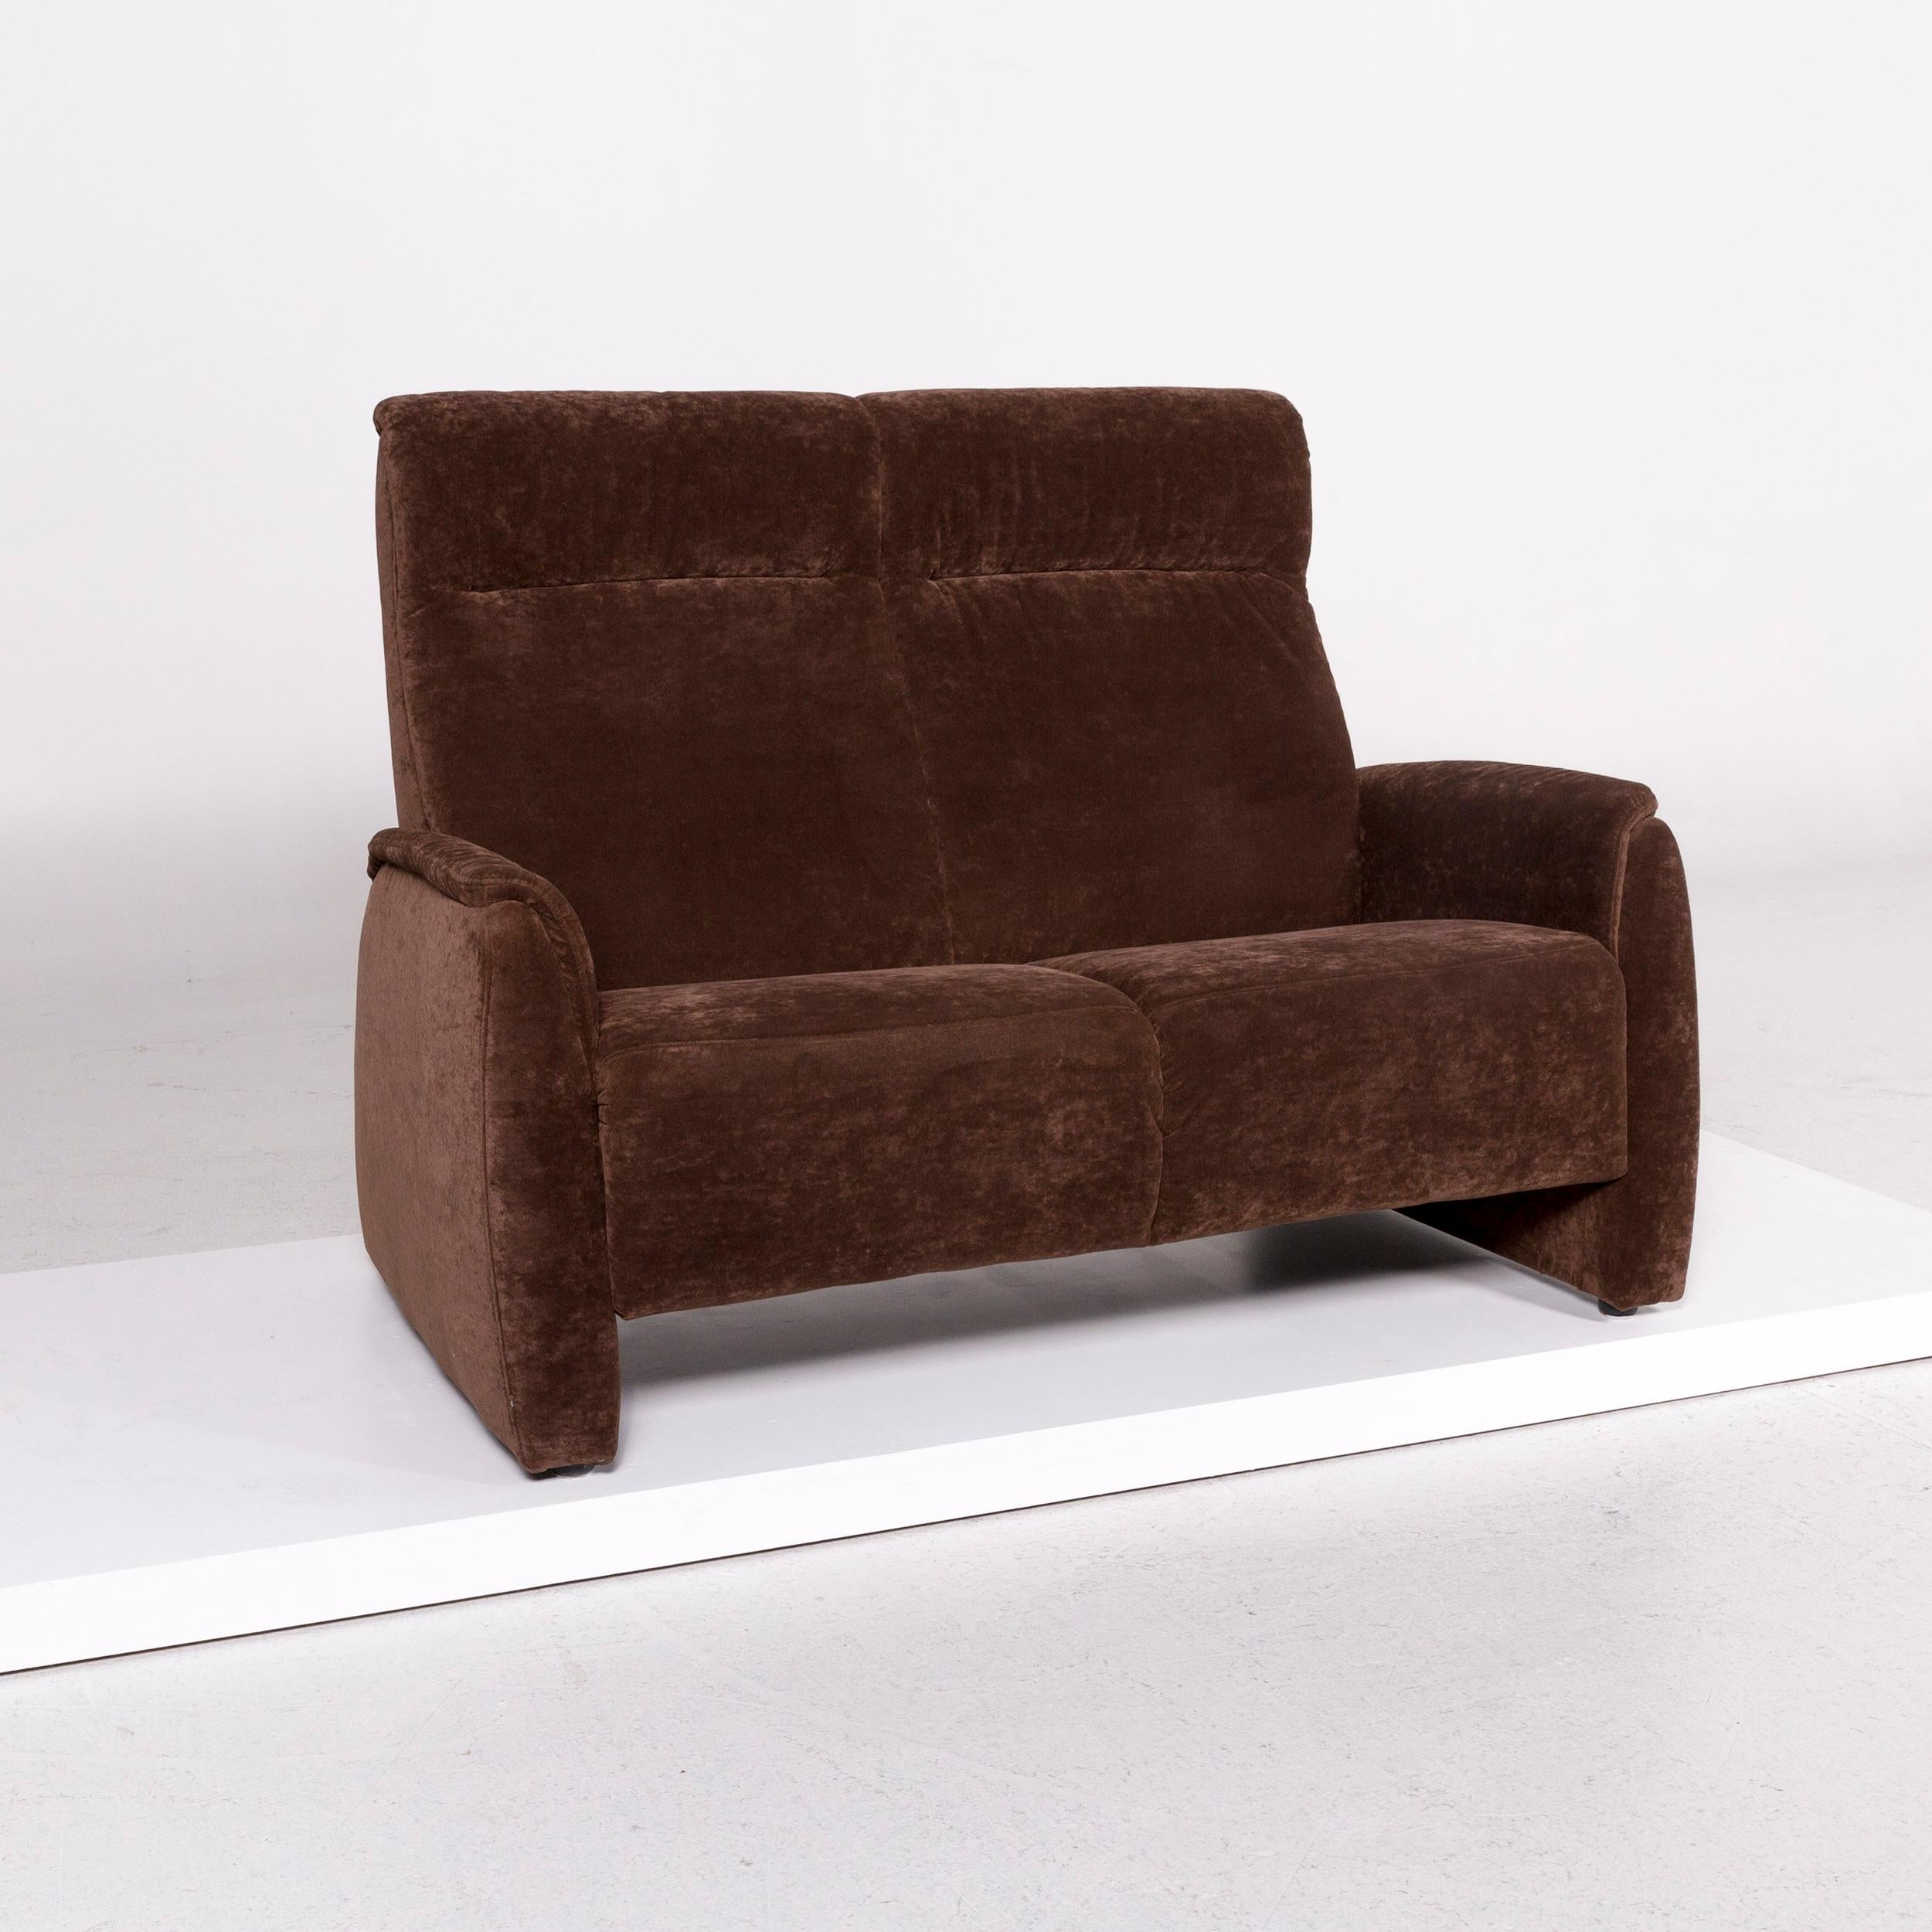 We bring to you a Himolla fabric sofa brown two-seat couch.

 

 Product measurements in centimeters:
 

Depth 95
Width 142
Height 116
Seat-height 50
Rest-height 58
Seat-depth 54
Seat-width 117
Back-height 62.